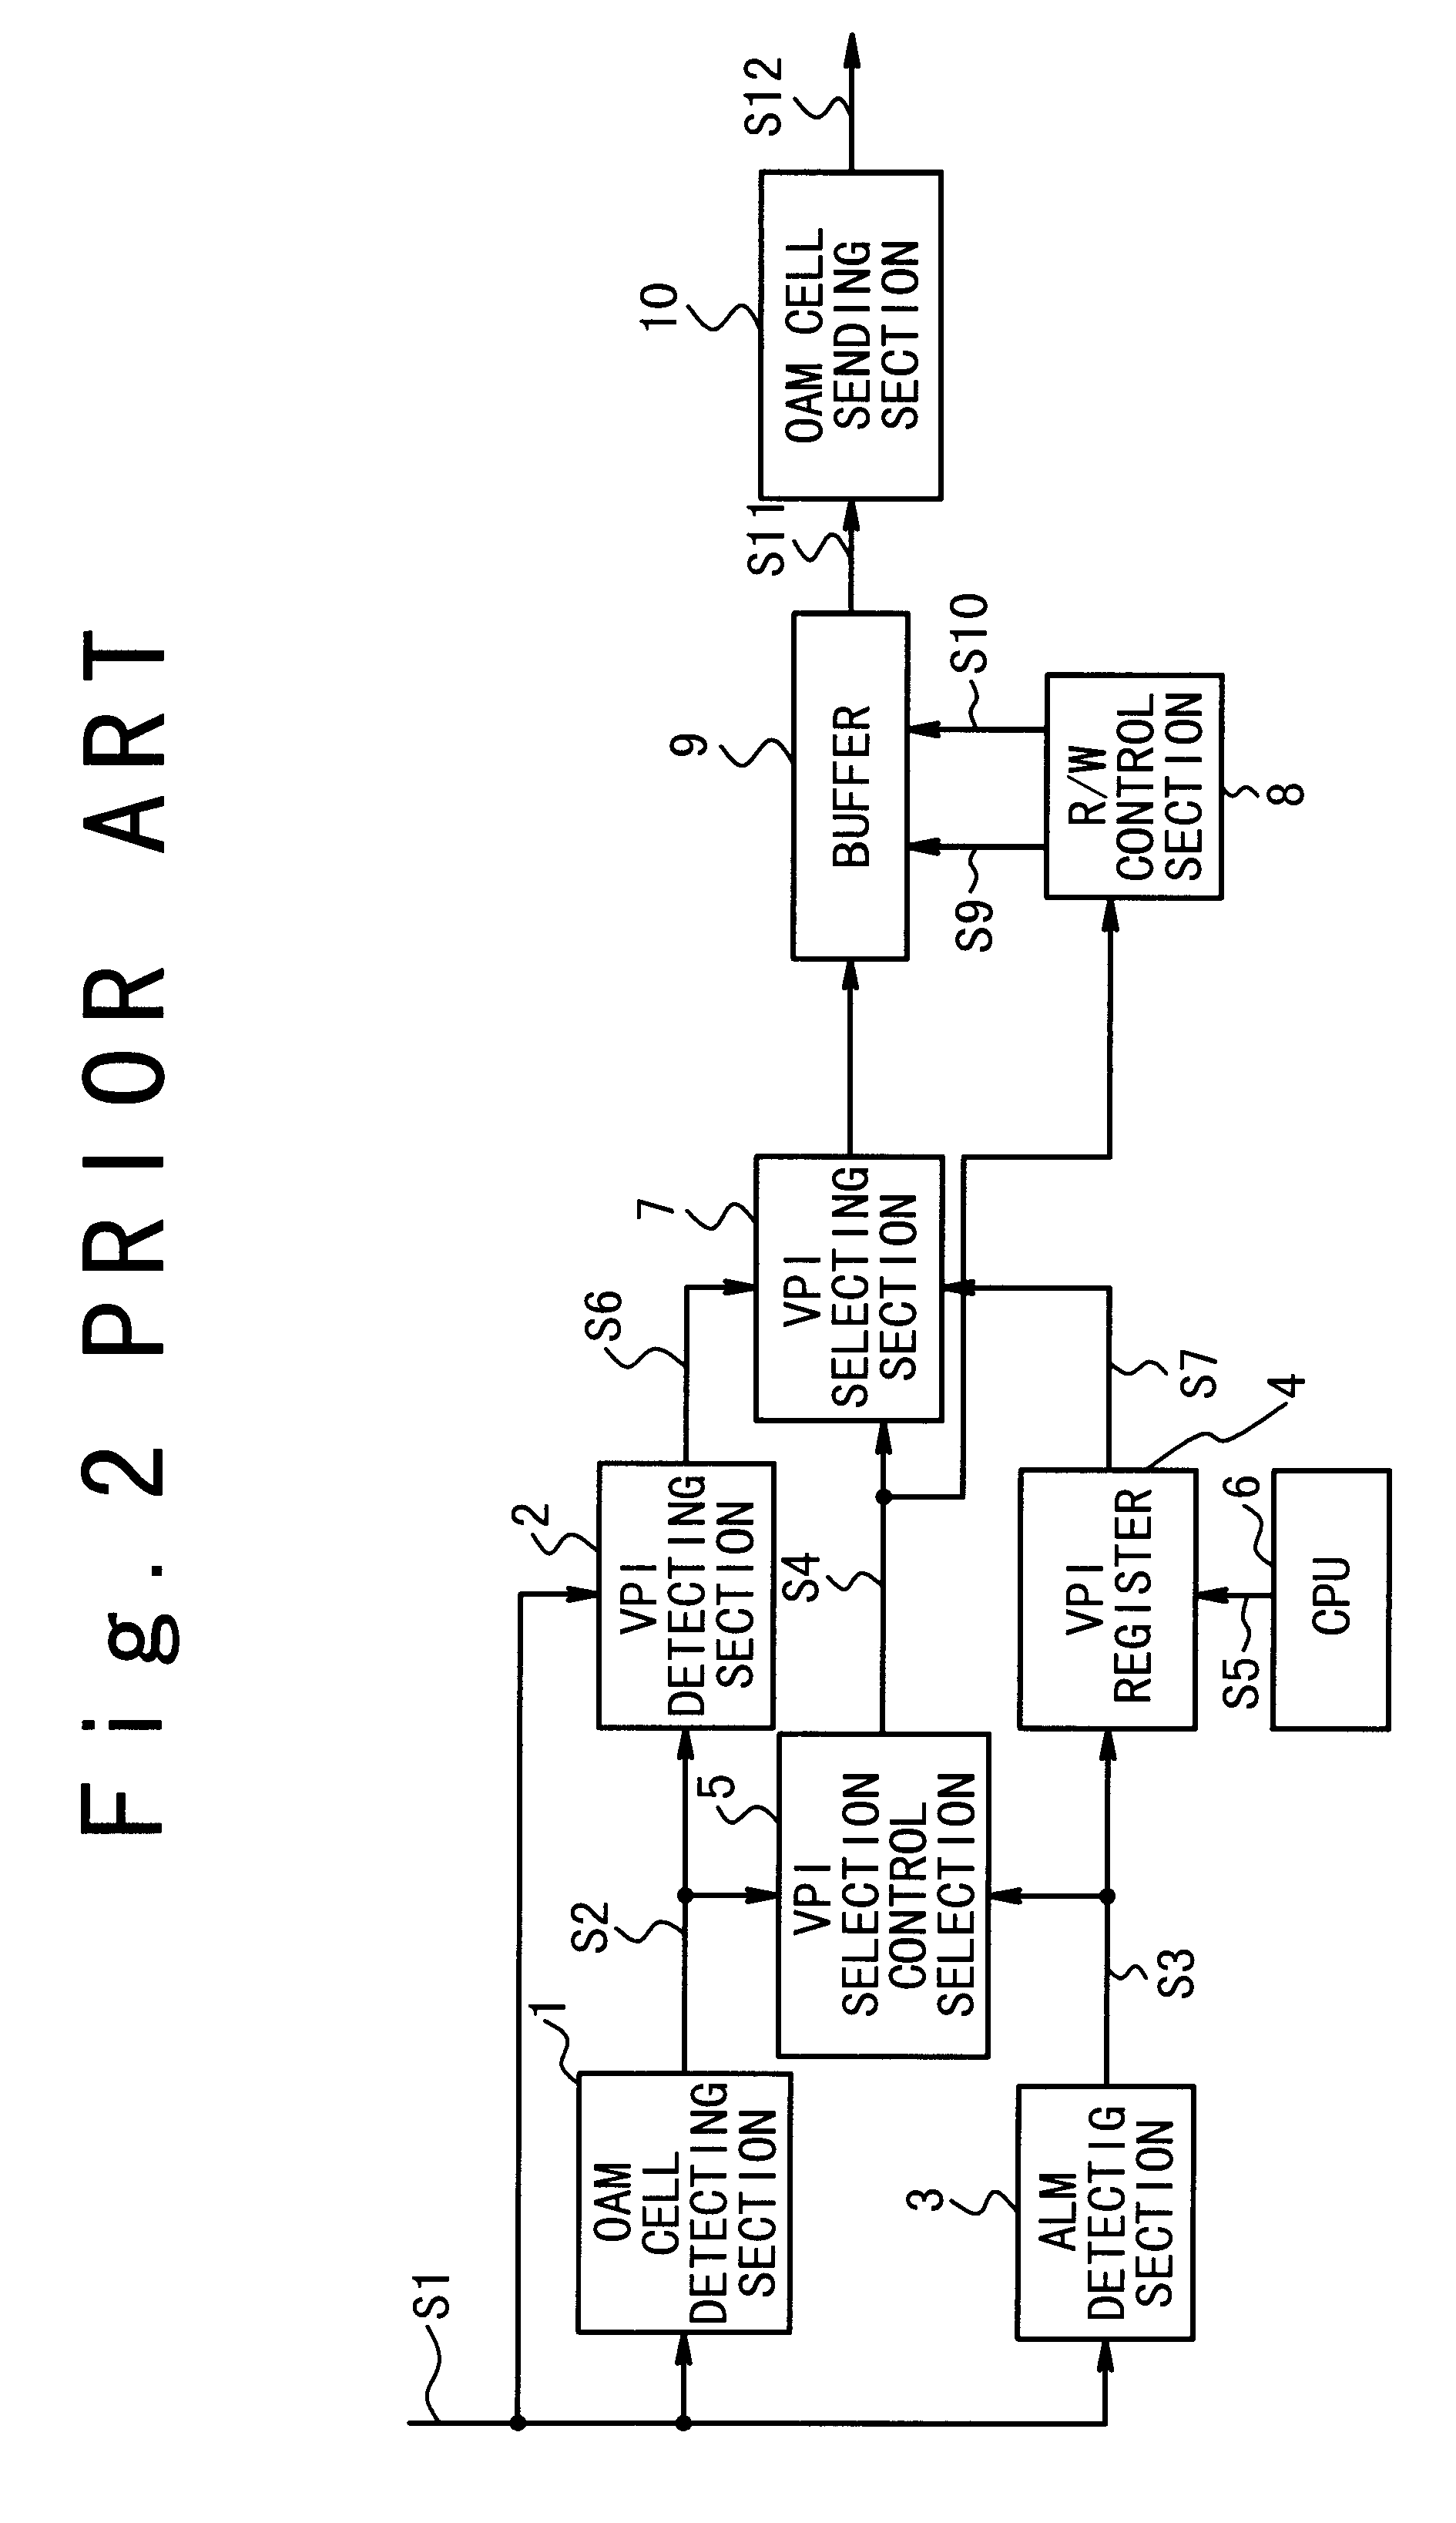 ATM cell transfer apparatus with hardware structure for OAM cell generation